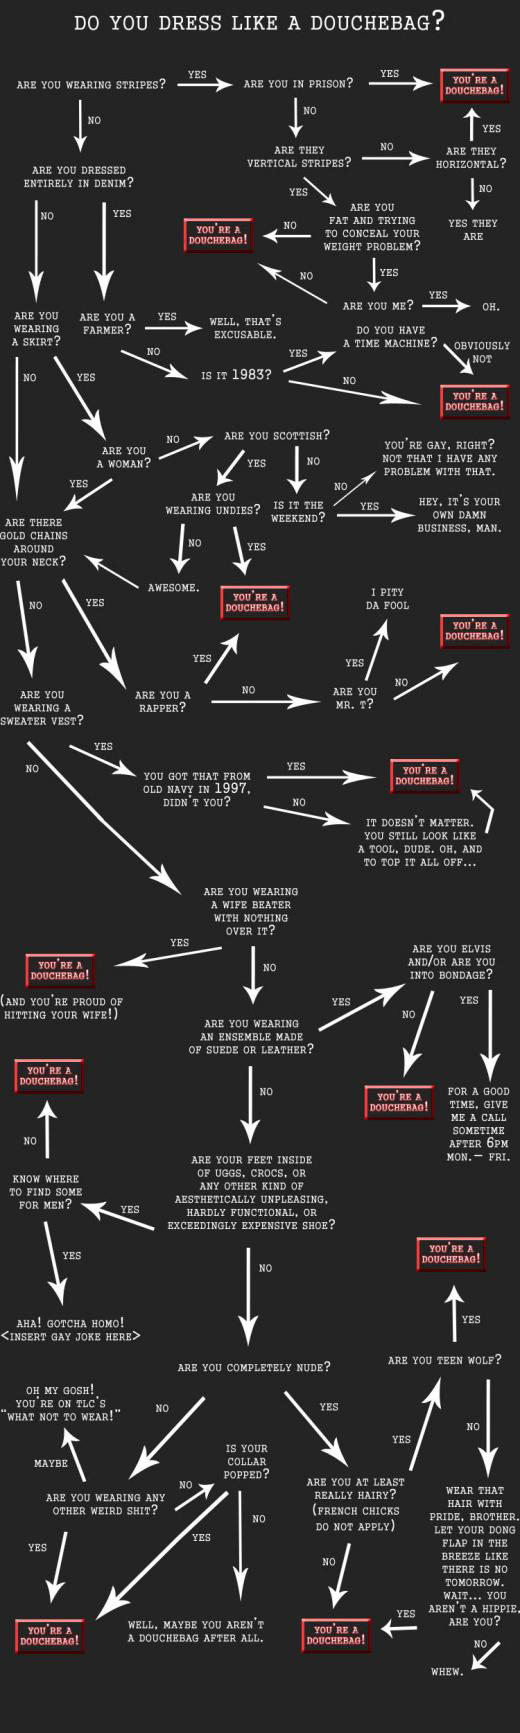 If you were ever in doubt if you dressed like a douchebag or not this flowchart will help you come to an answer.